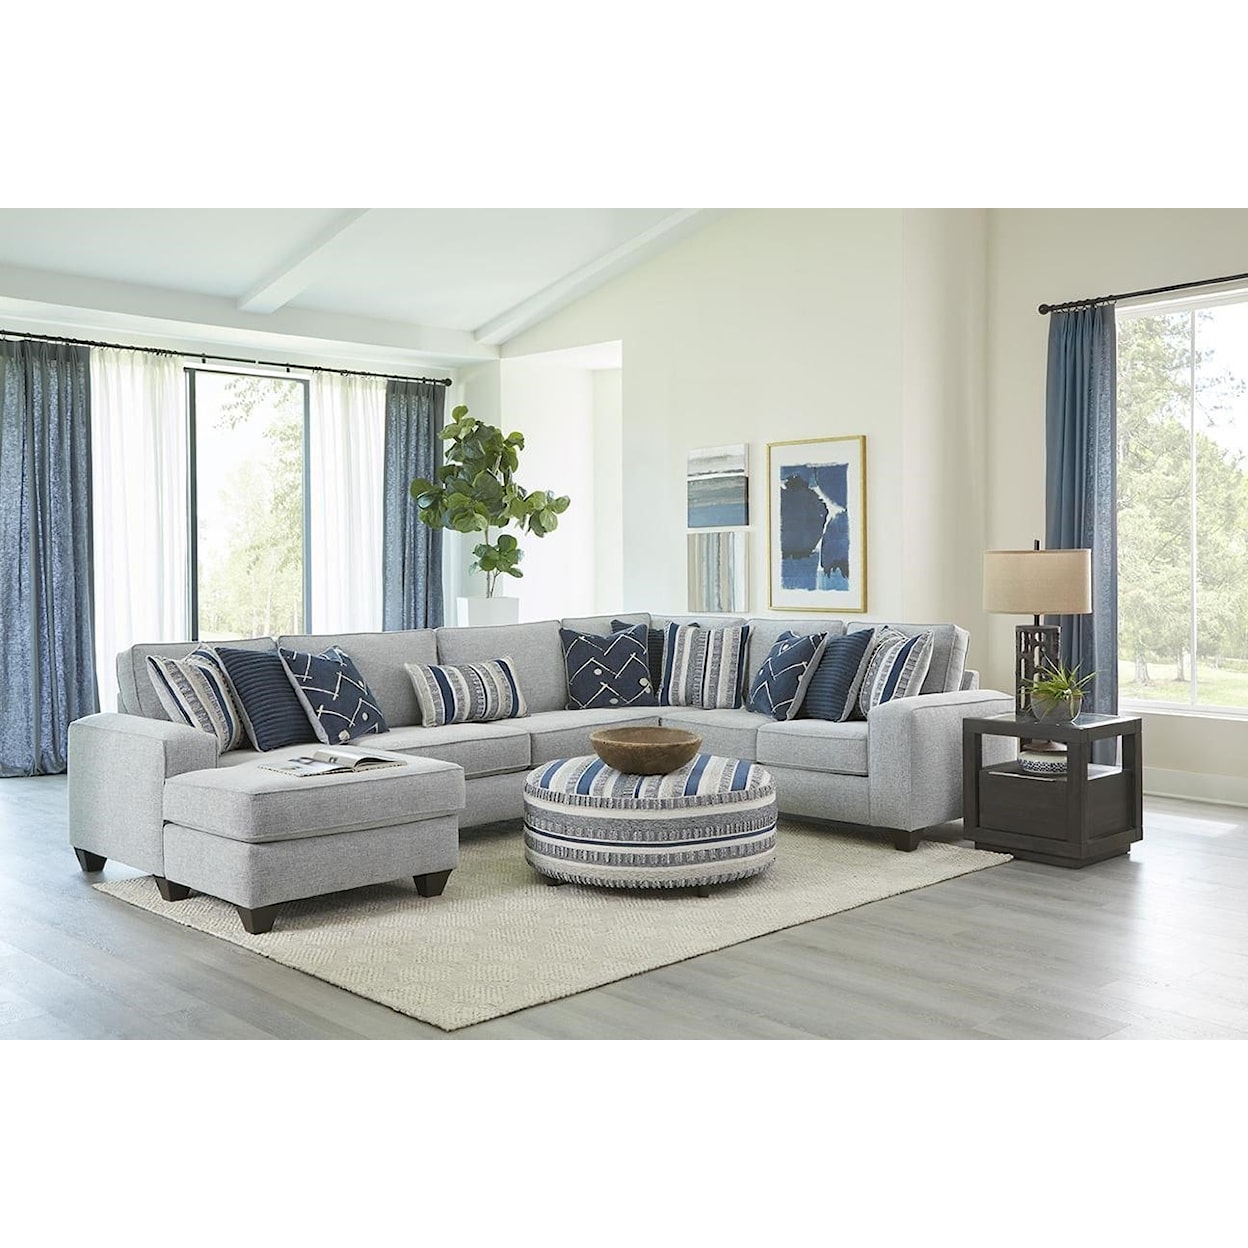 Albany 462 3 Piece Chaise Sectional